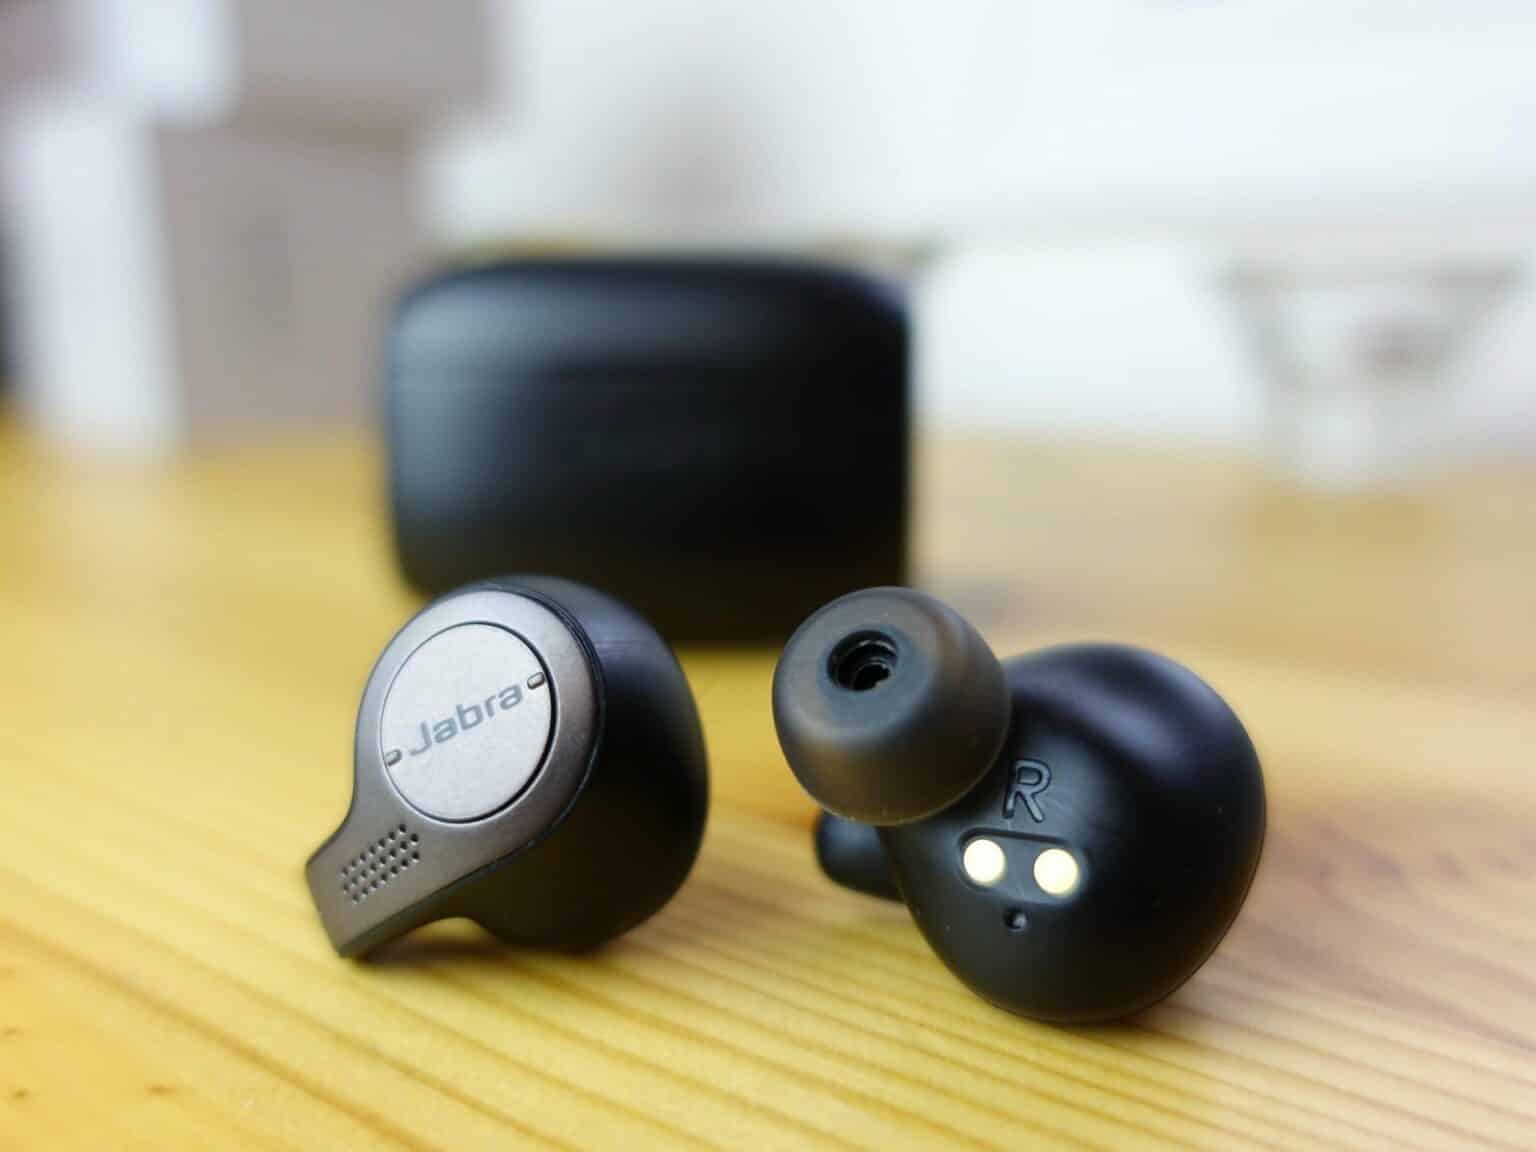 How to Pair Jabra Earbuds